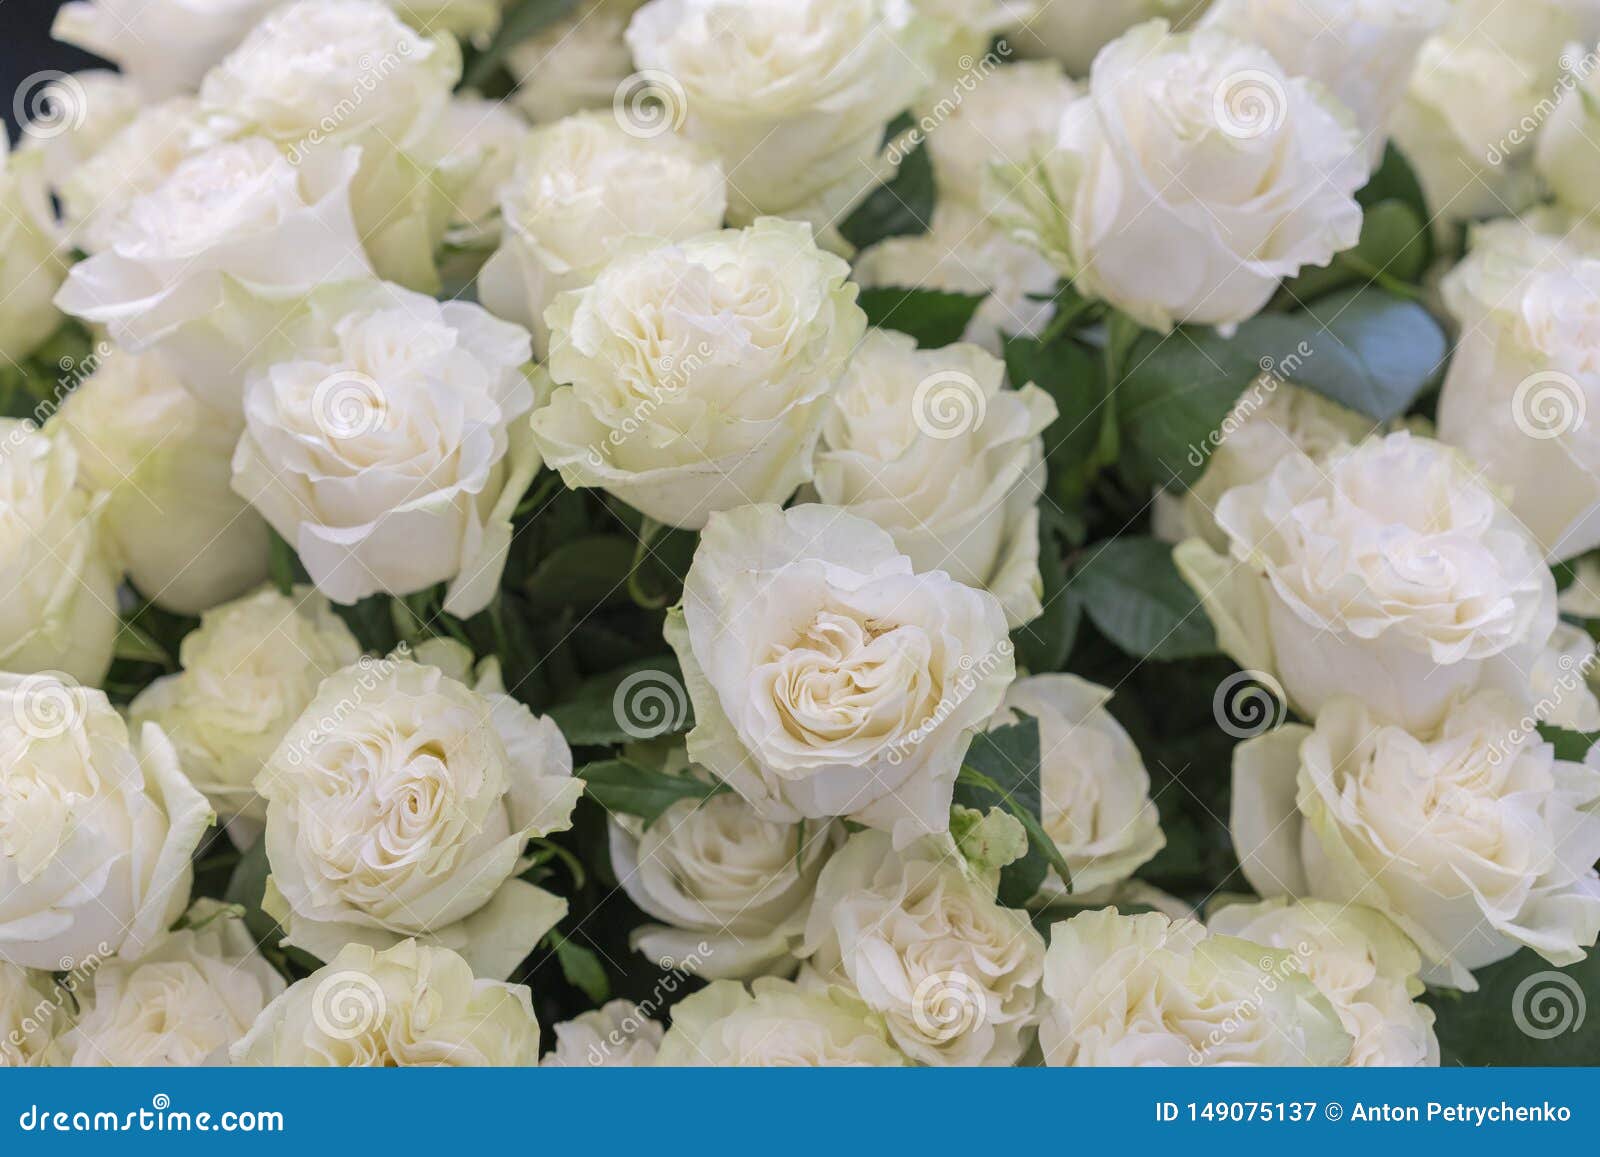 Isolated Close Up Of A Huge Bouquet Of White Roses White Roses Flower